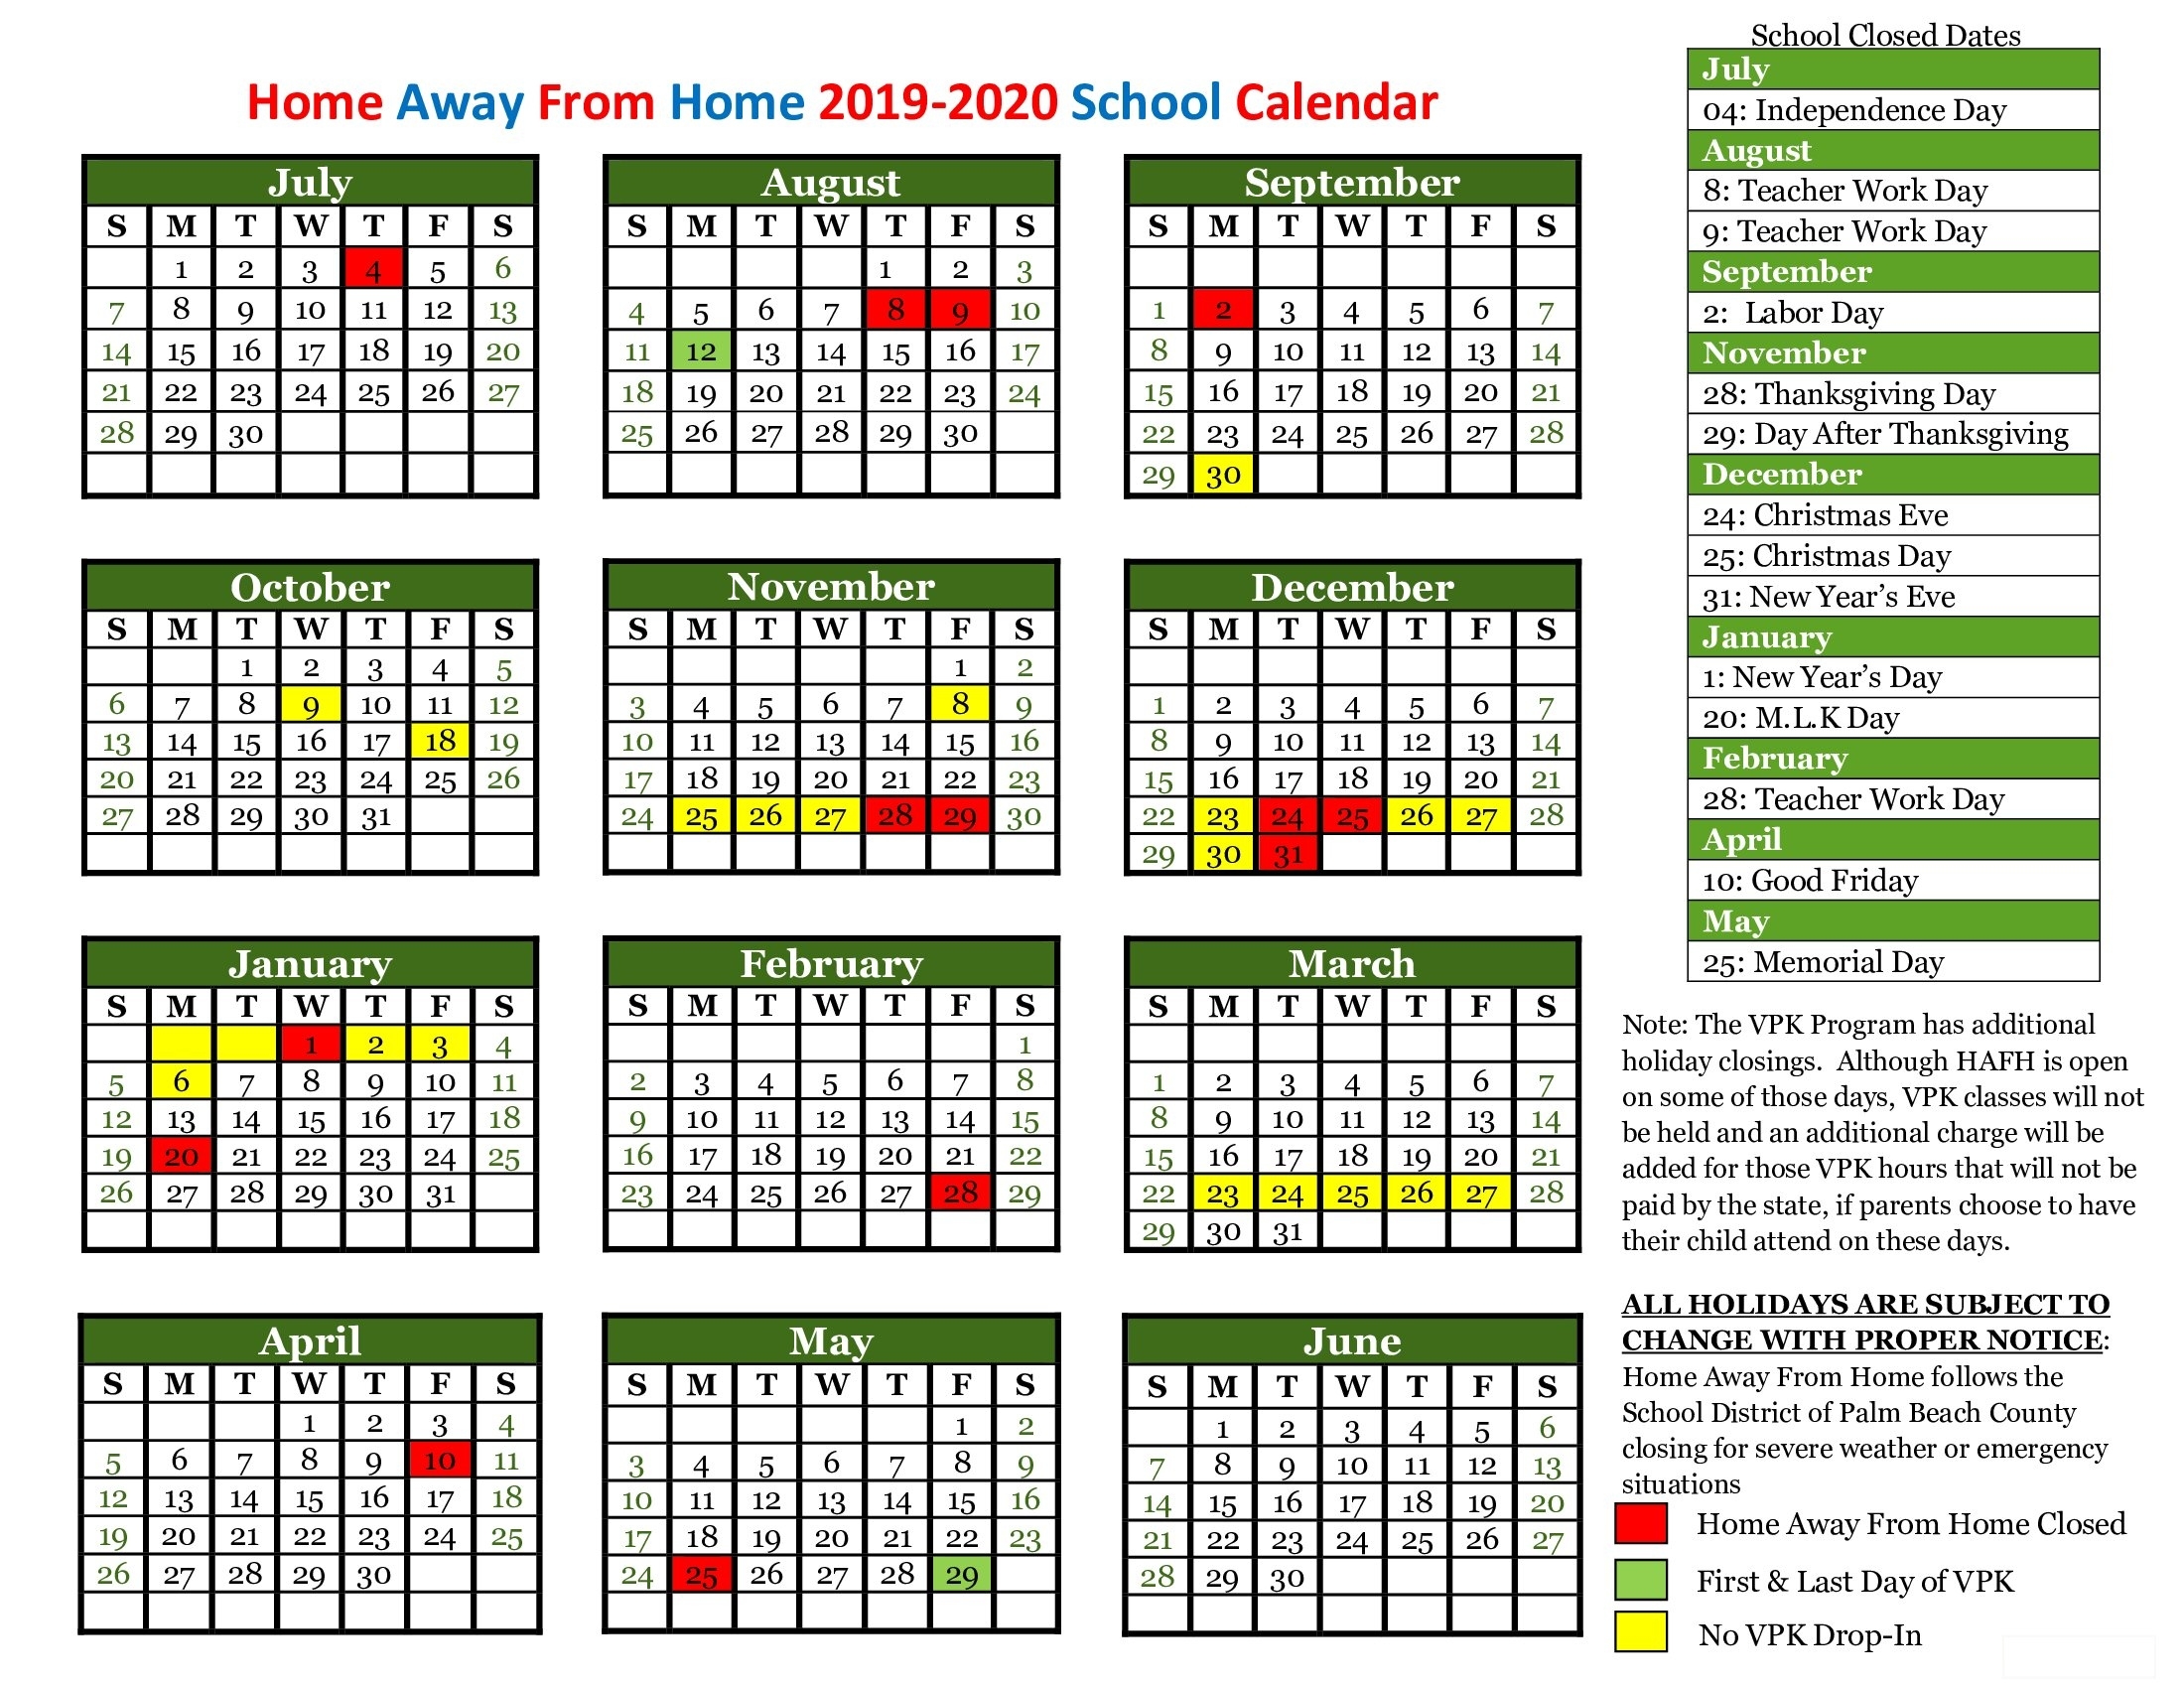 Child Care Holiday Schedule - View School Closings | Home Away From Home Note 8 Calendar Holidays